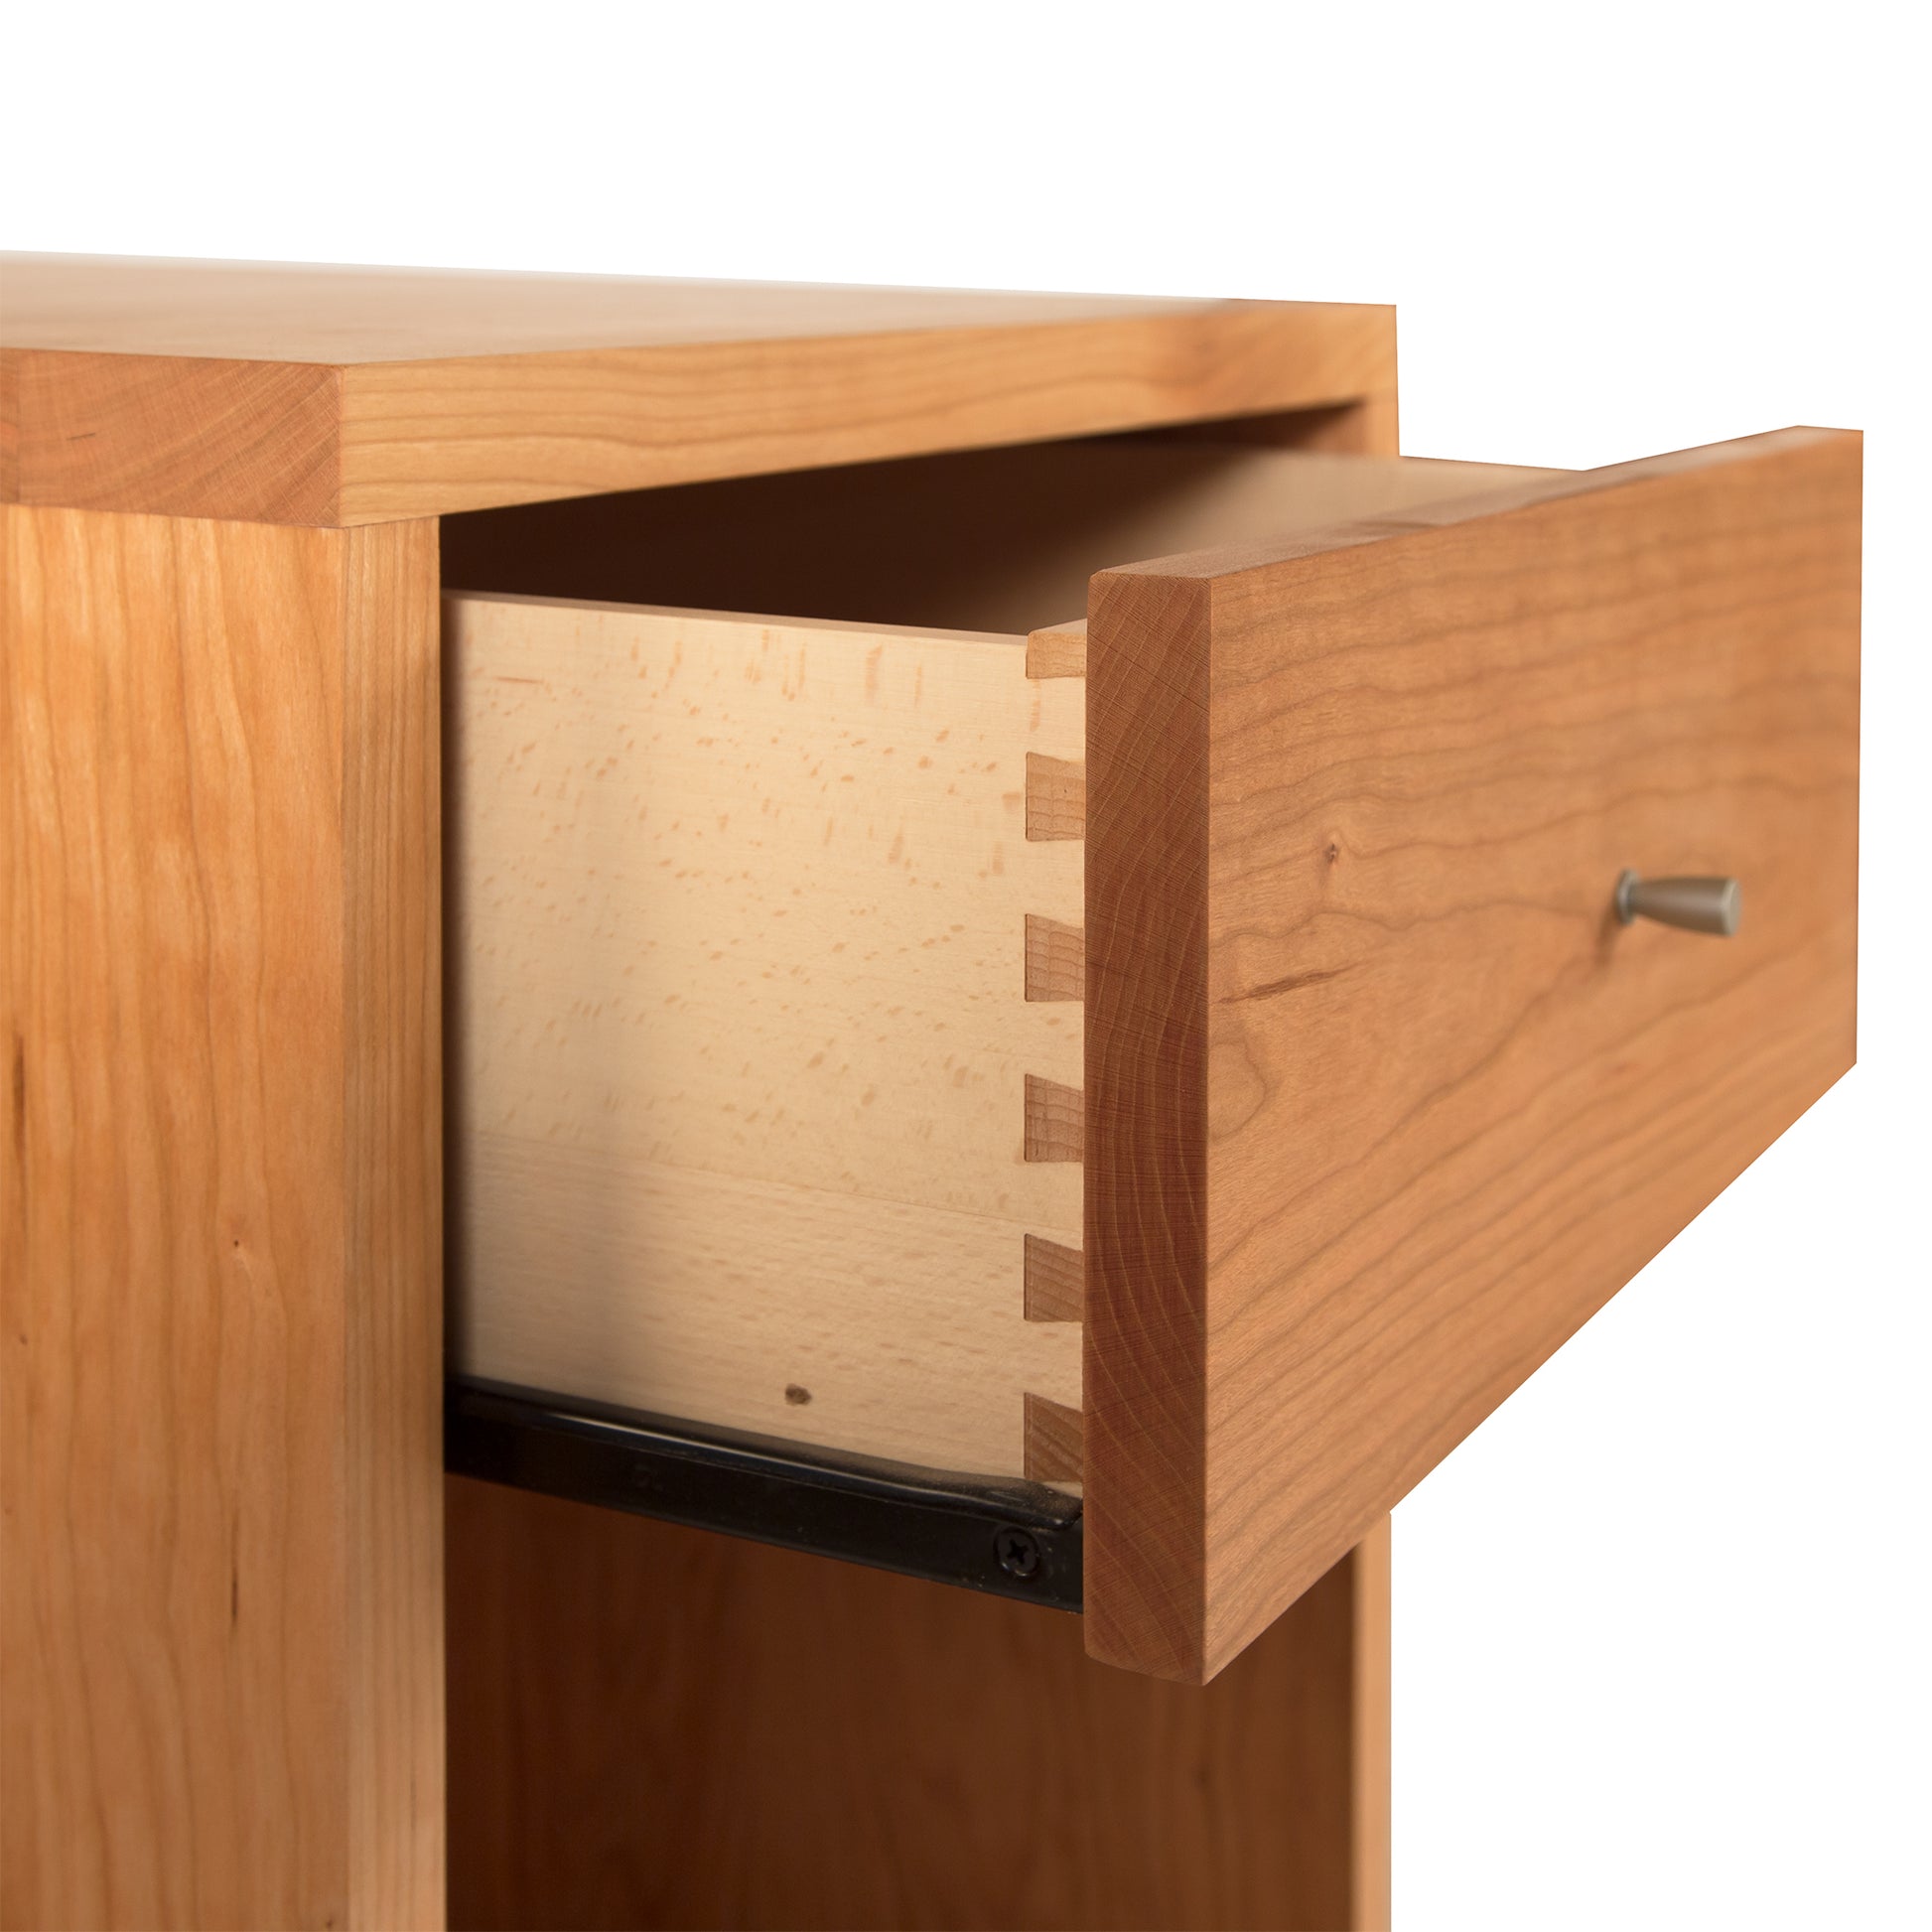 A wooden Vermont Furniture Designs Larssen 1-Drawer Enclosed Shelf Nightstand with a mid-century modern design has an open drawer.